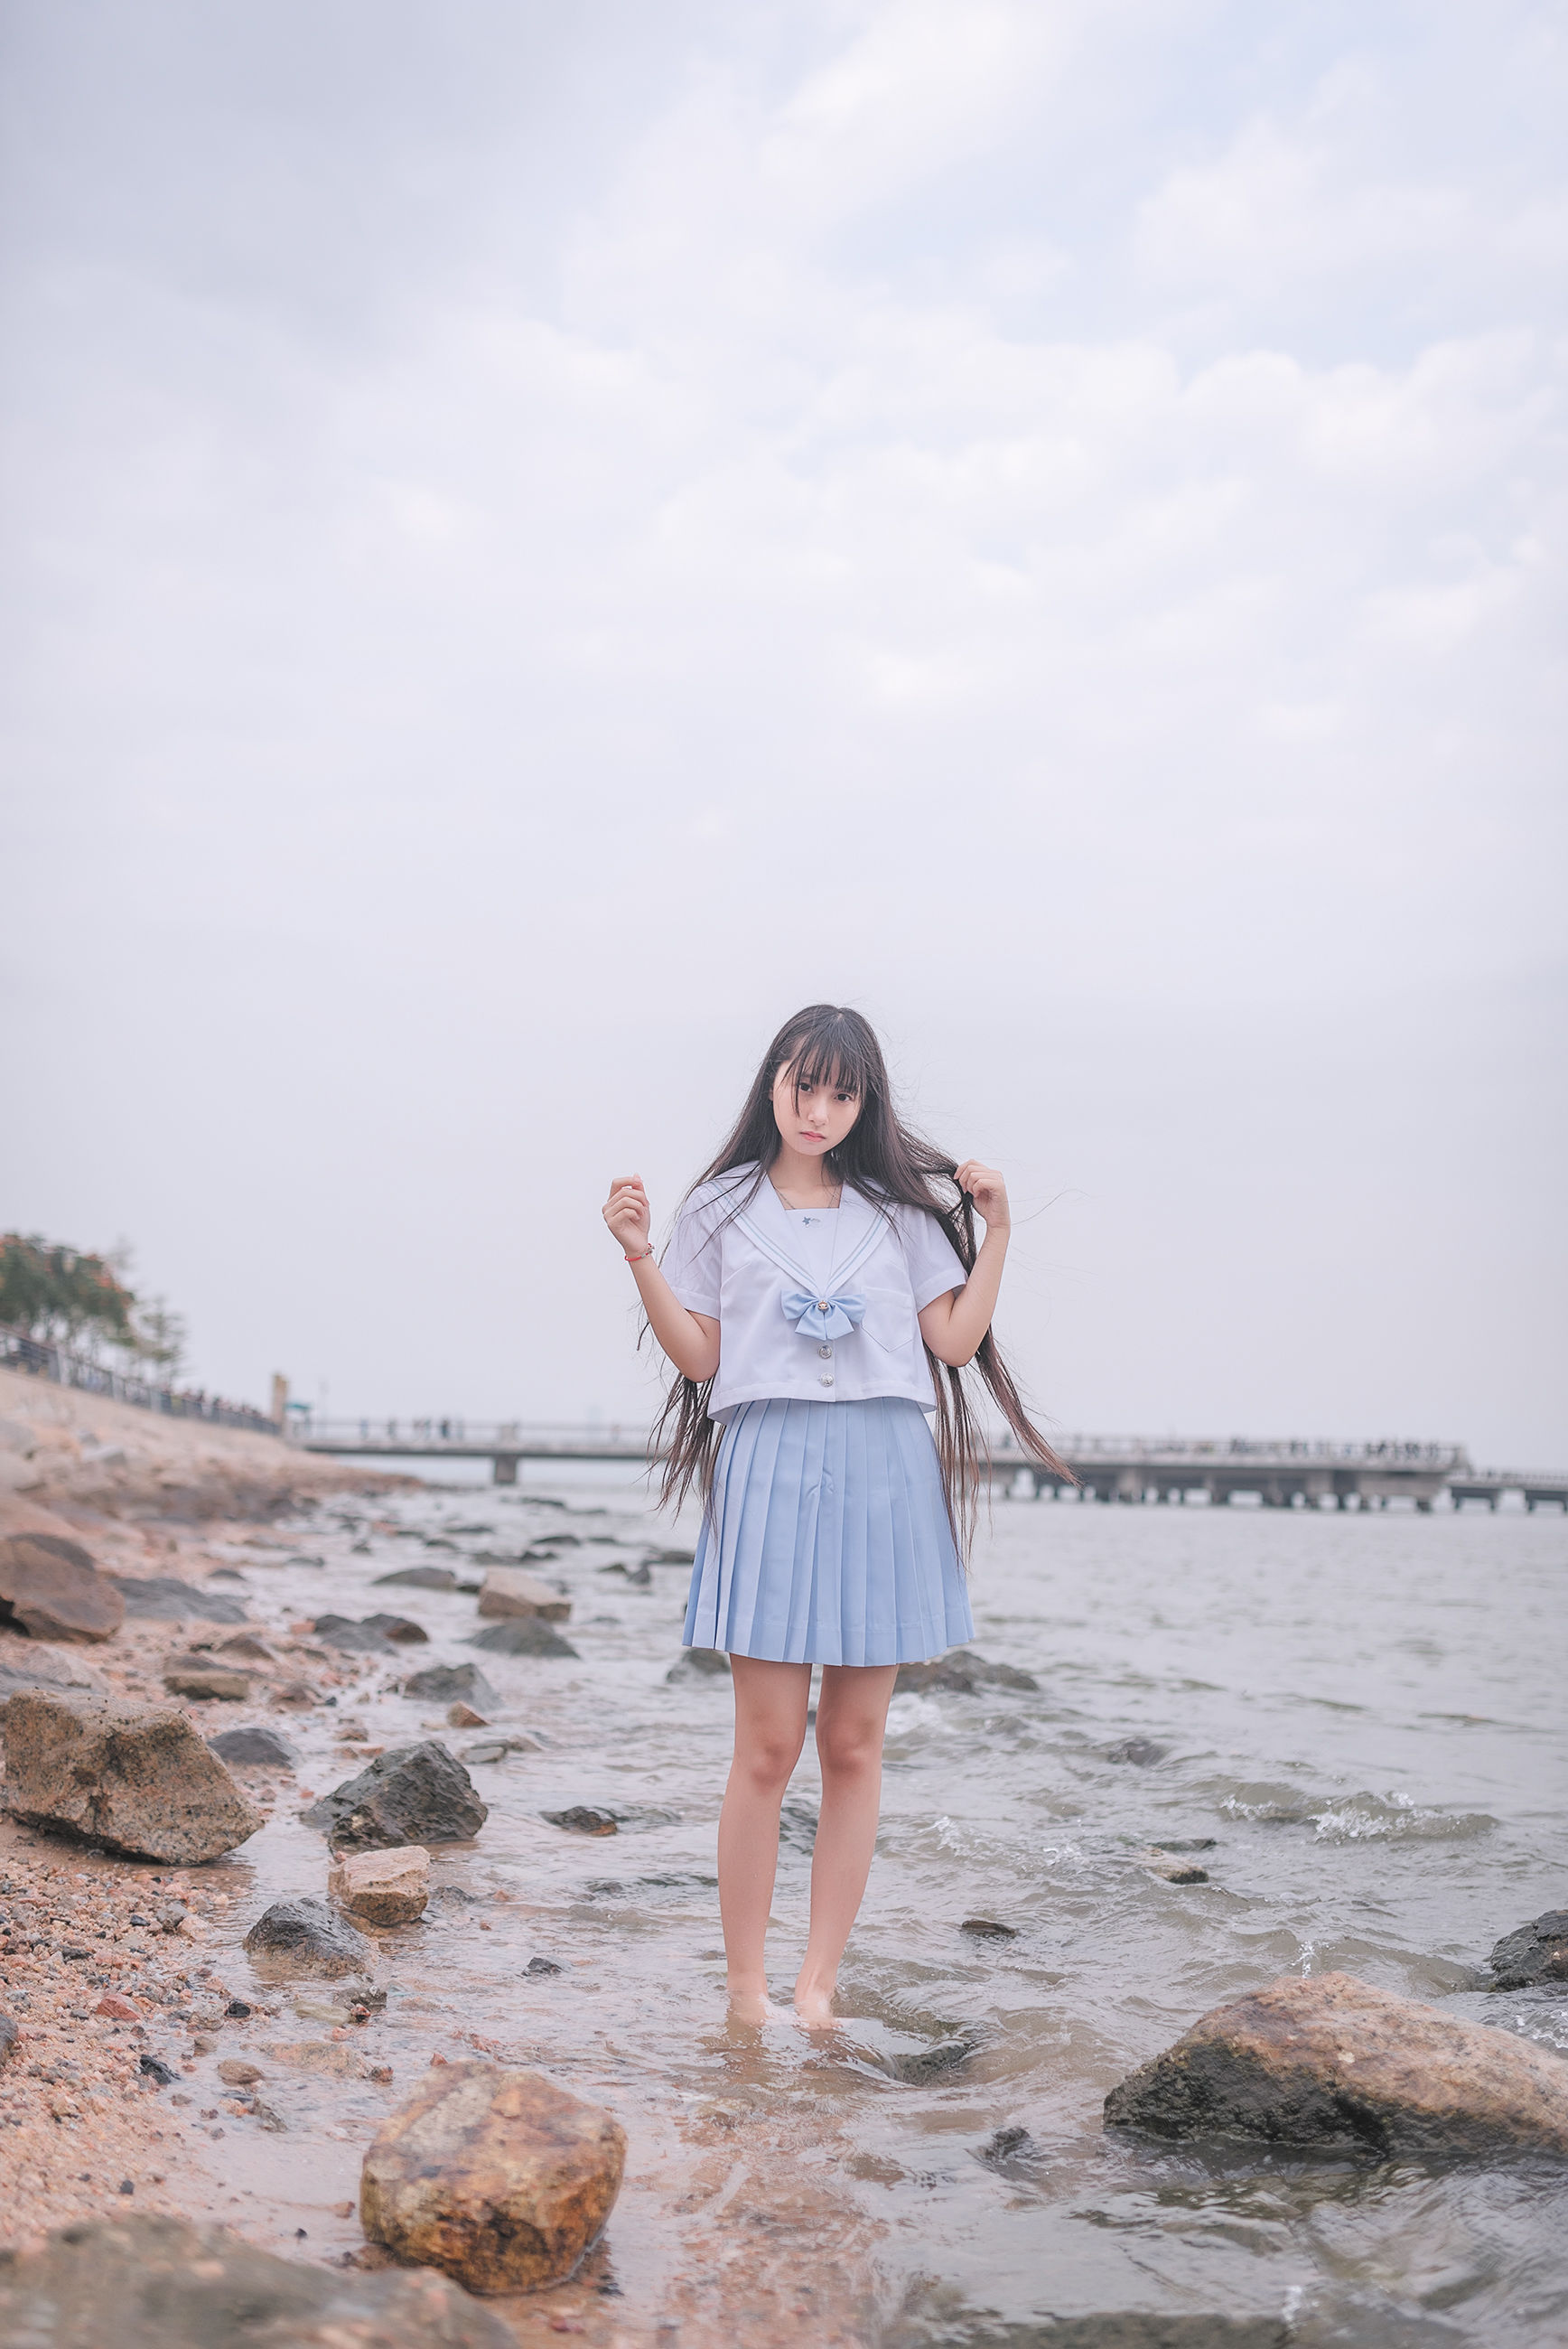 COS Welfare Meng Girl Gama Yu Luo -Go to the Sea together